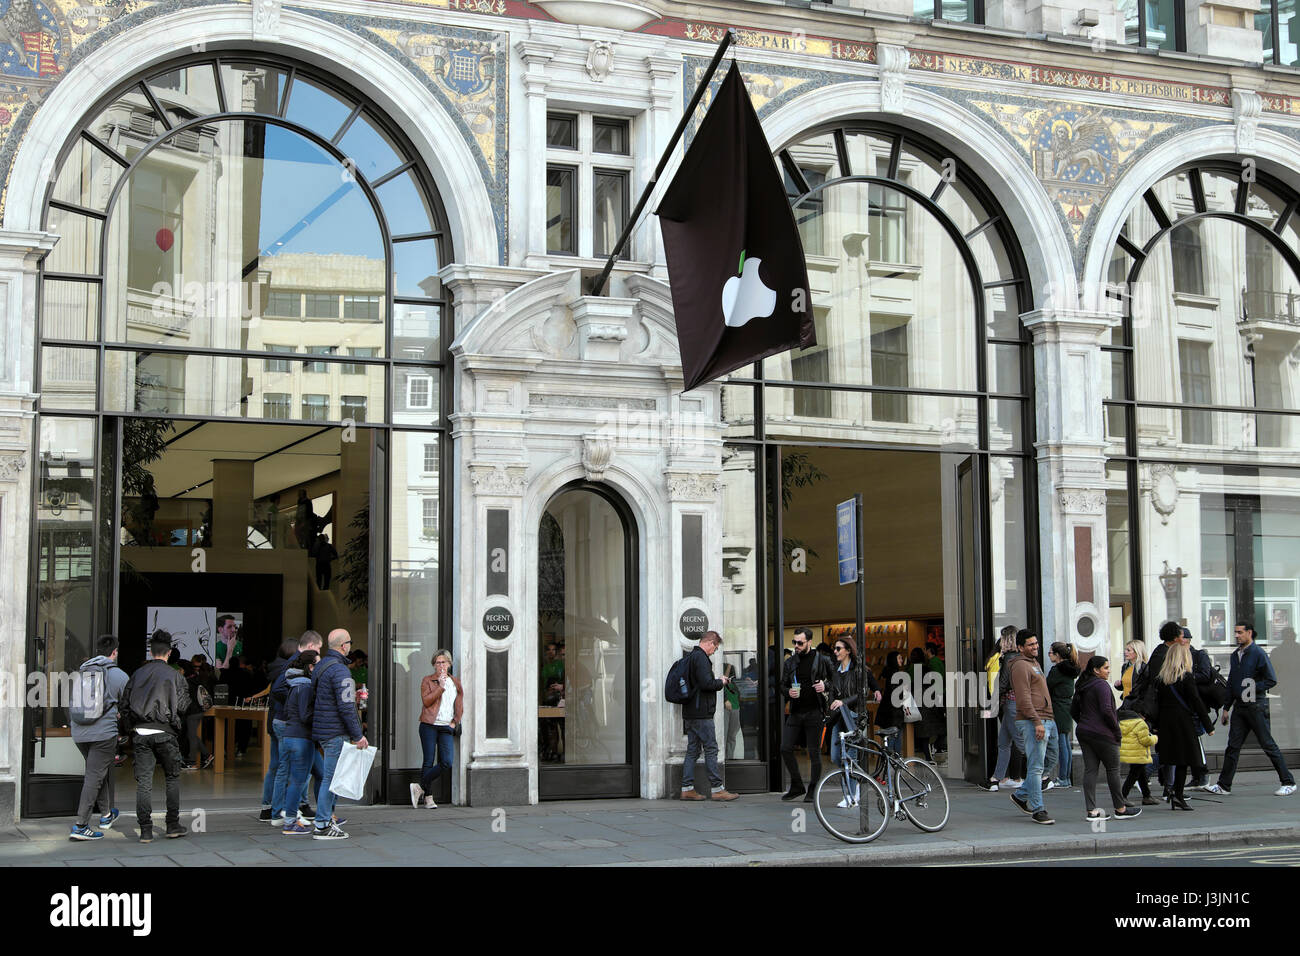 EXTERIOR VIEW OF PEOPLE OUTSIDE THE REGENTS STREET APPLE STORE IN MAYFAIR, WEST LONDON UK WC1B    KATHY DEWITT Stock Photo